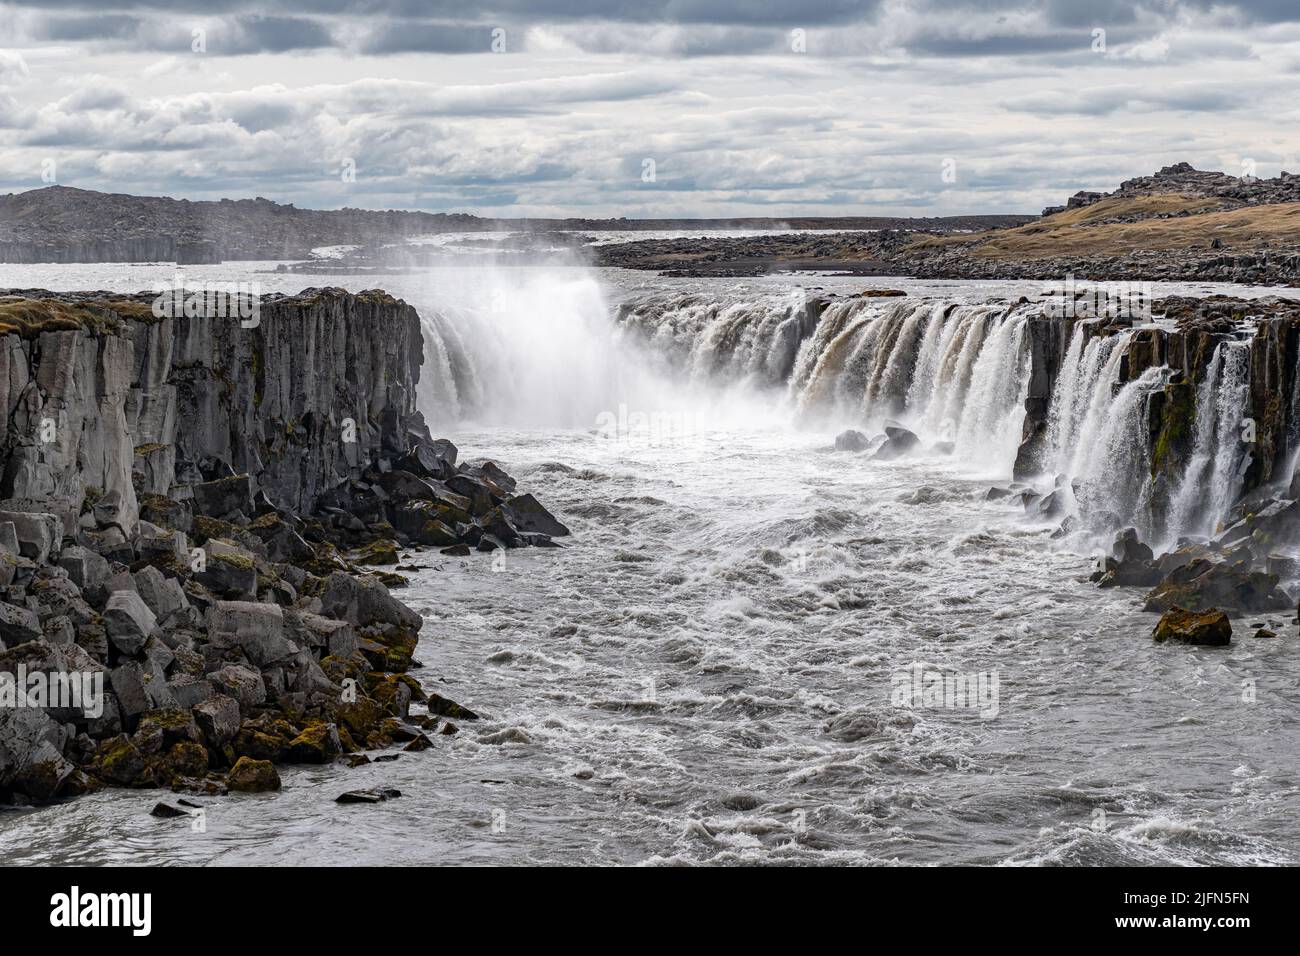 The waterfall Selfoss seen from the east bank of river Jokulsa a Fjollum, in northern Iceland Stock Photo